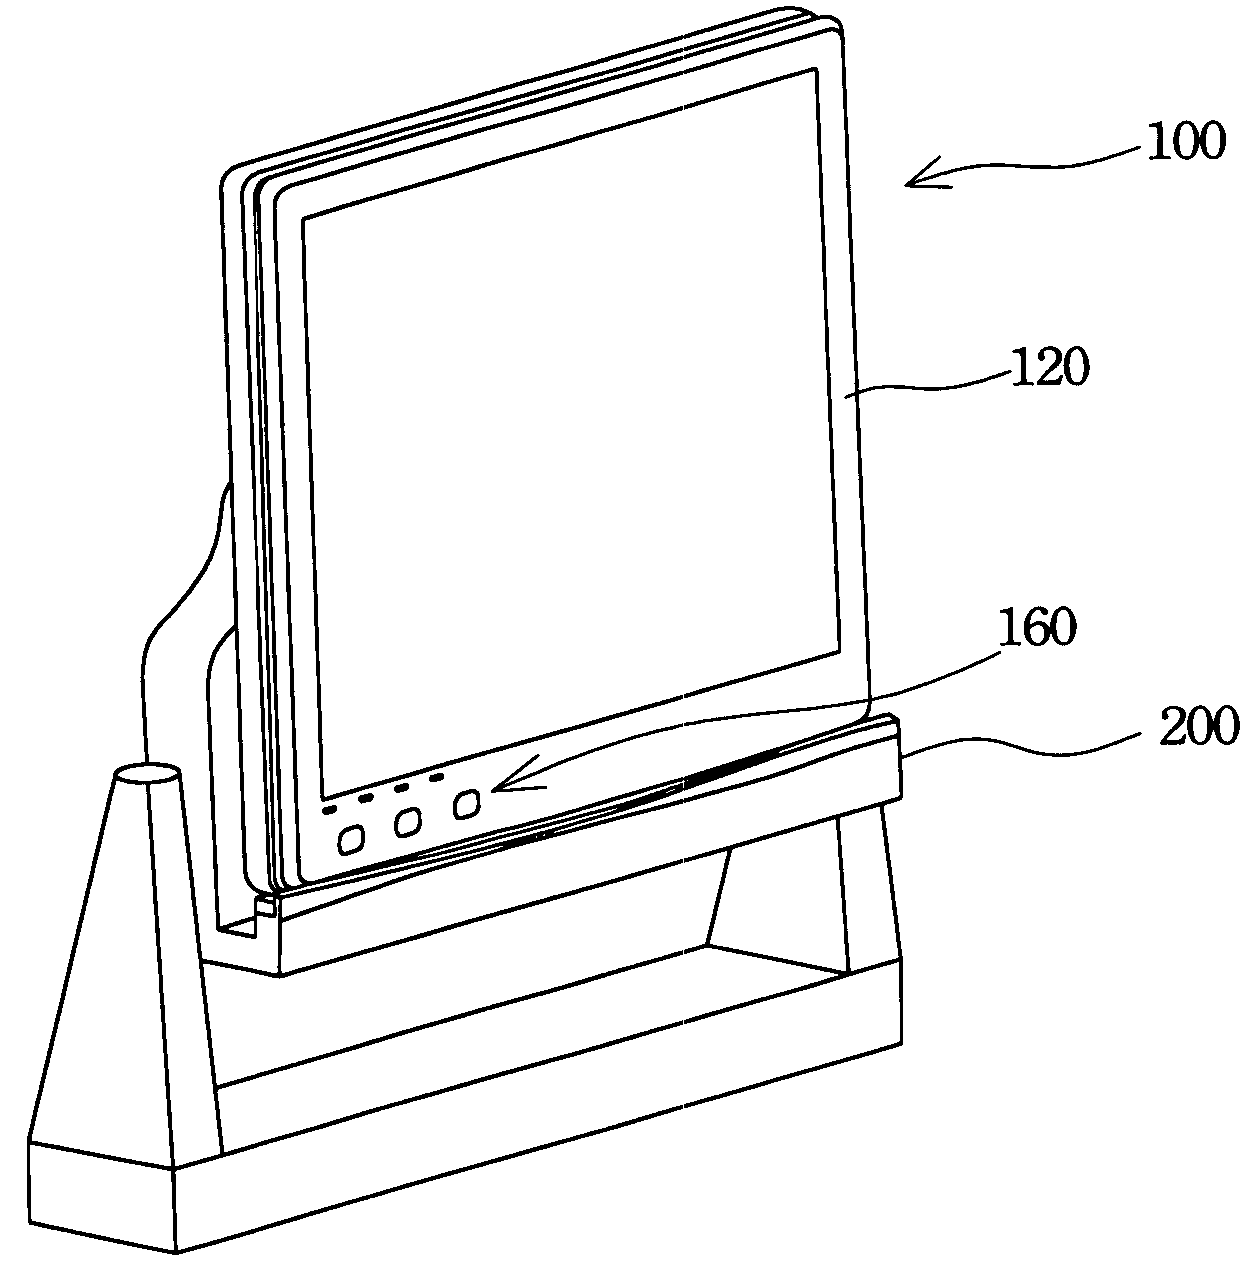 Liquid crystal display with optical disk drive control functions